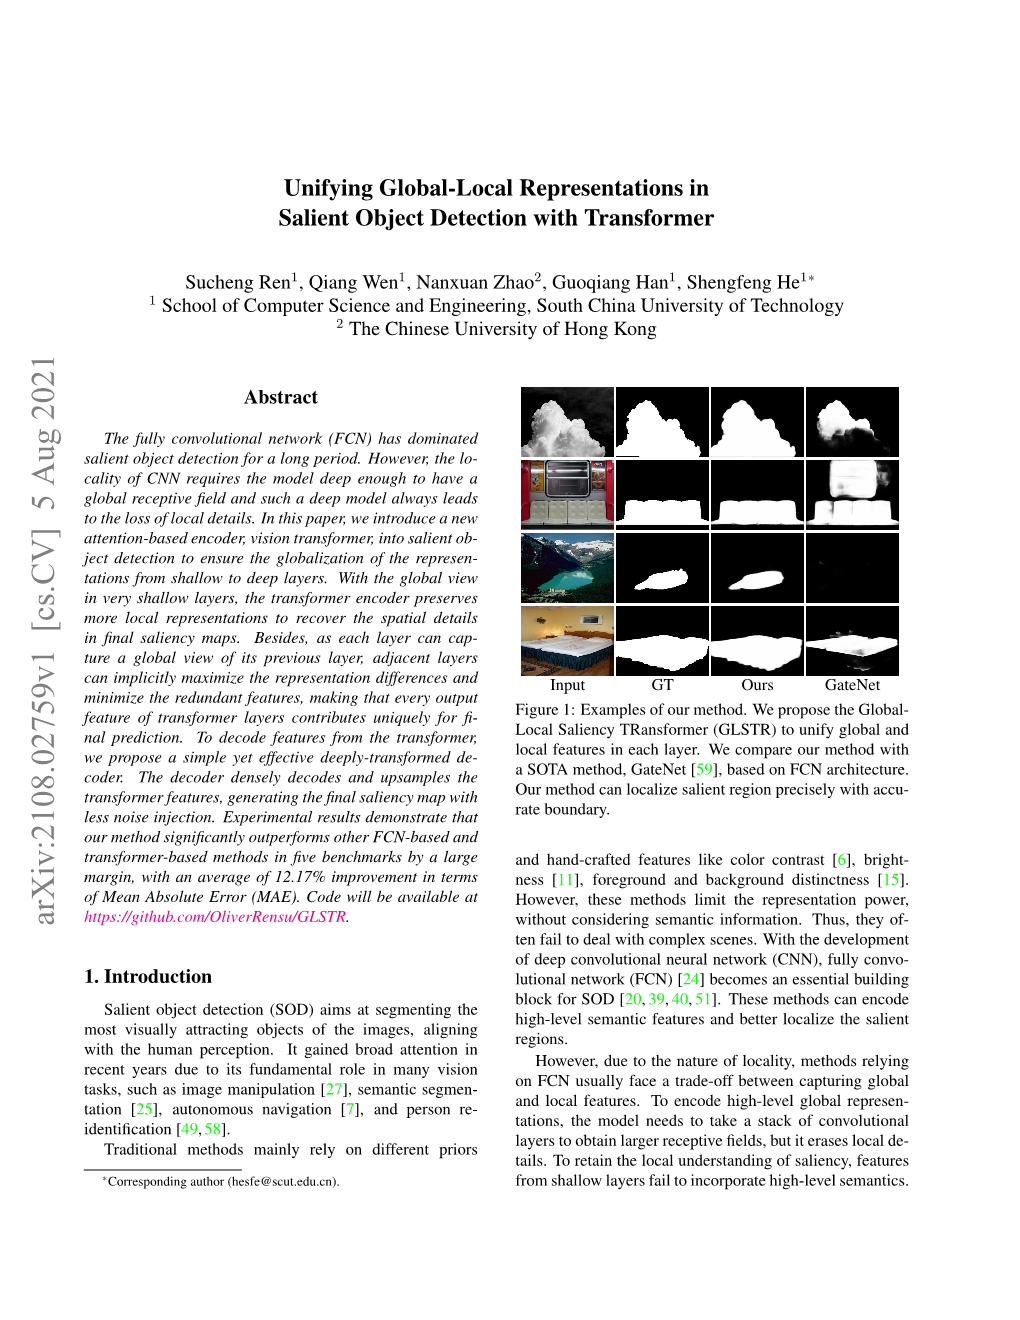 Unifying Global-Local Representations in Salient Object Detection with Transformer